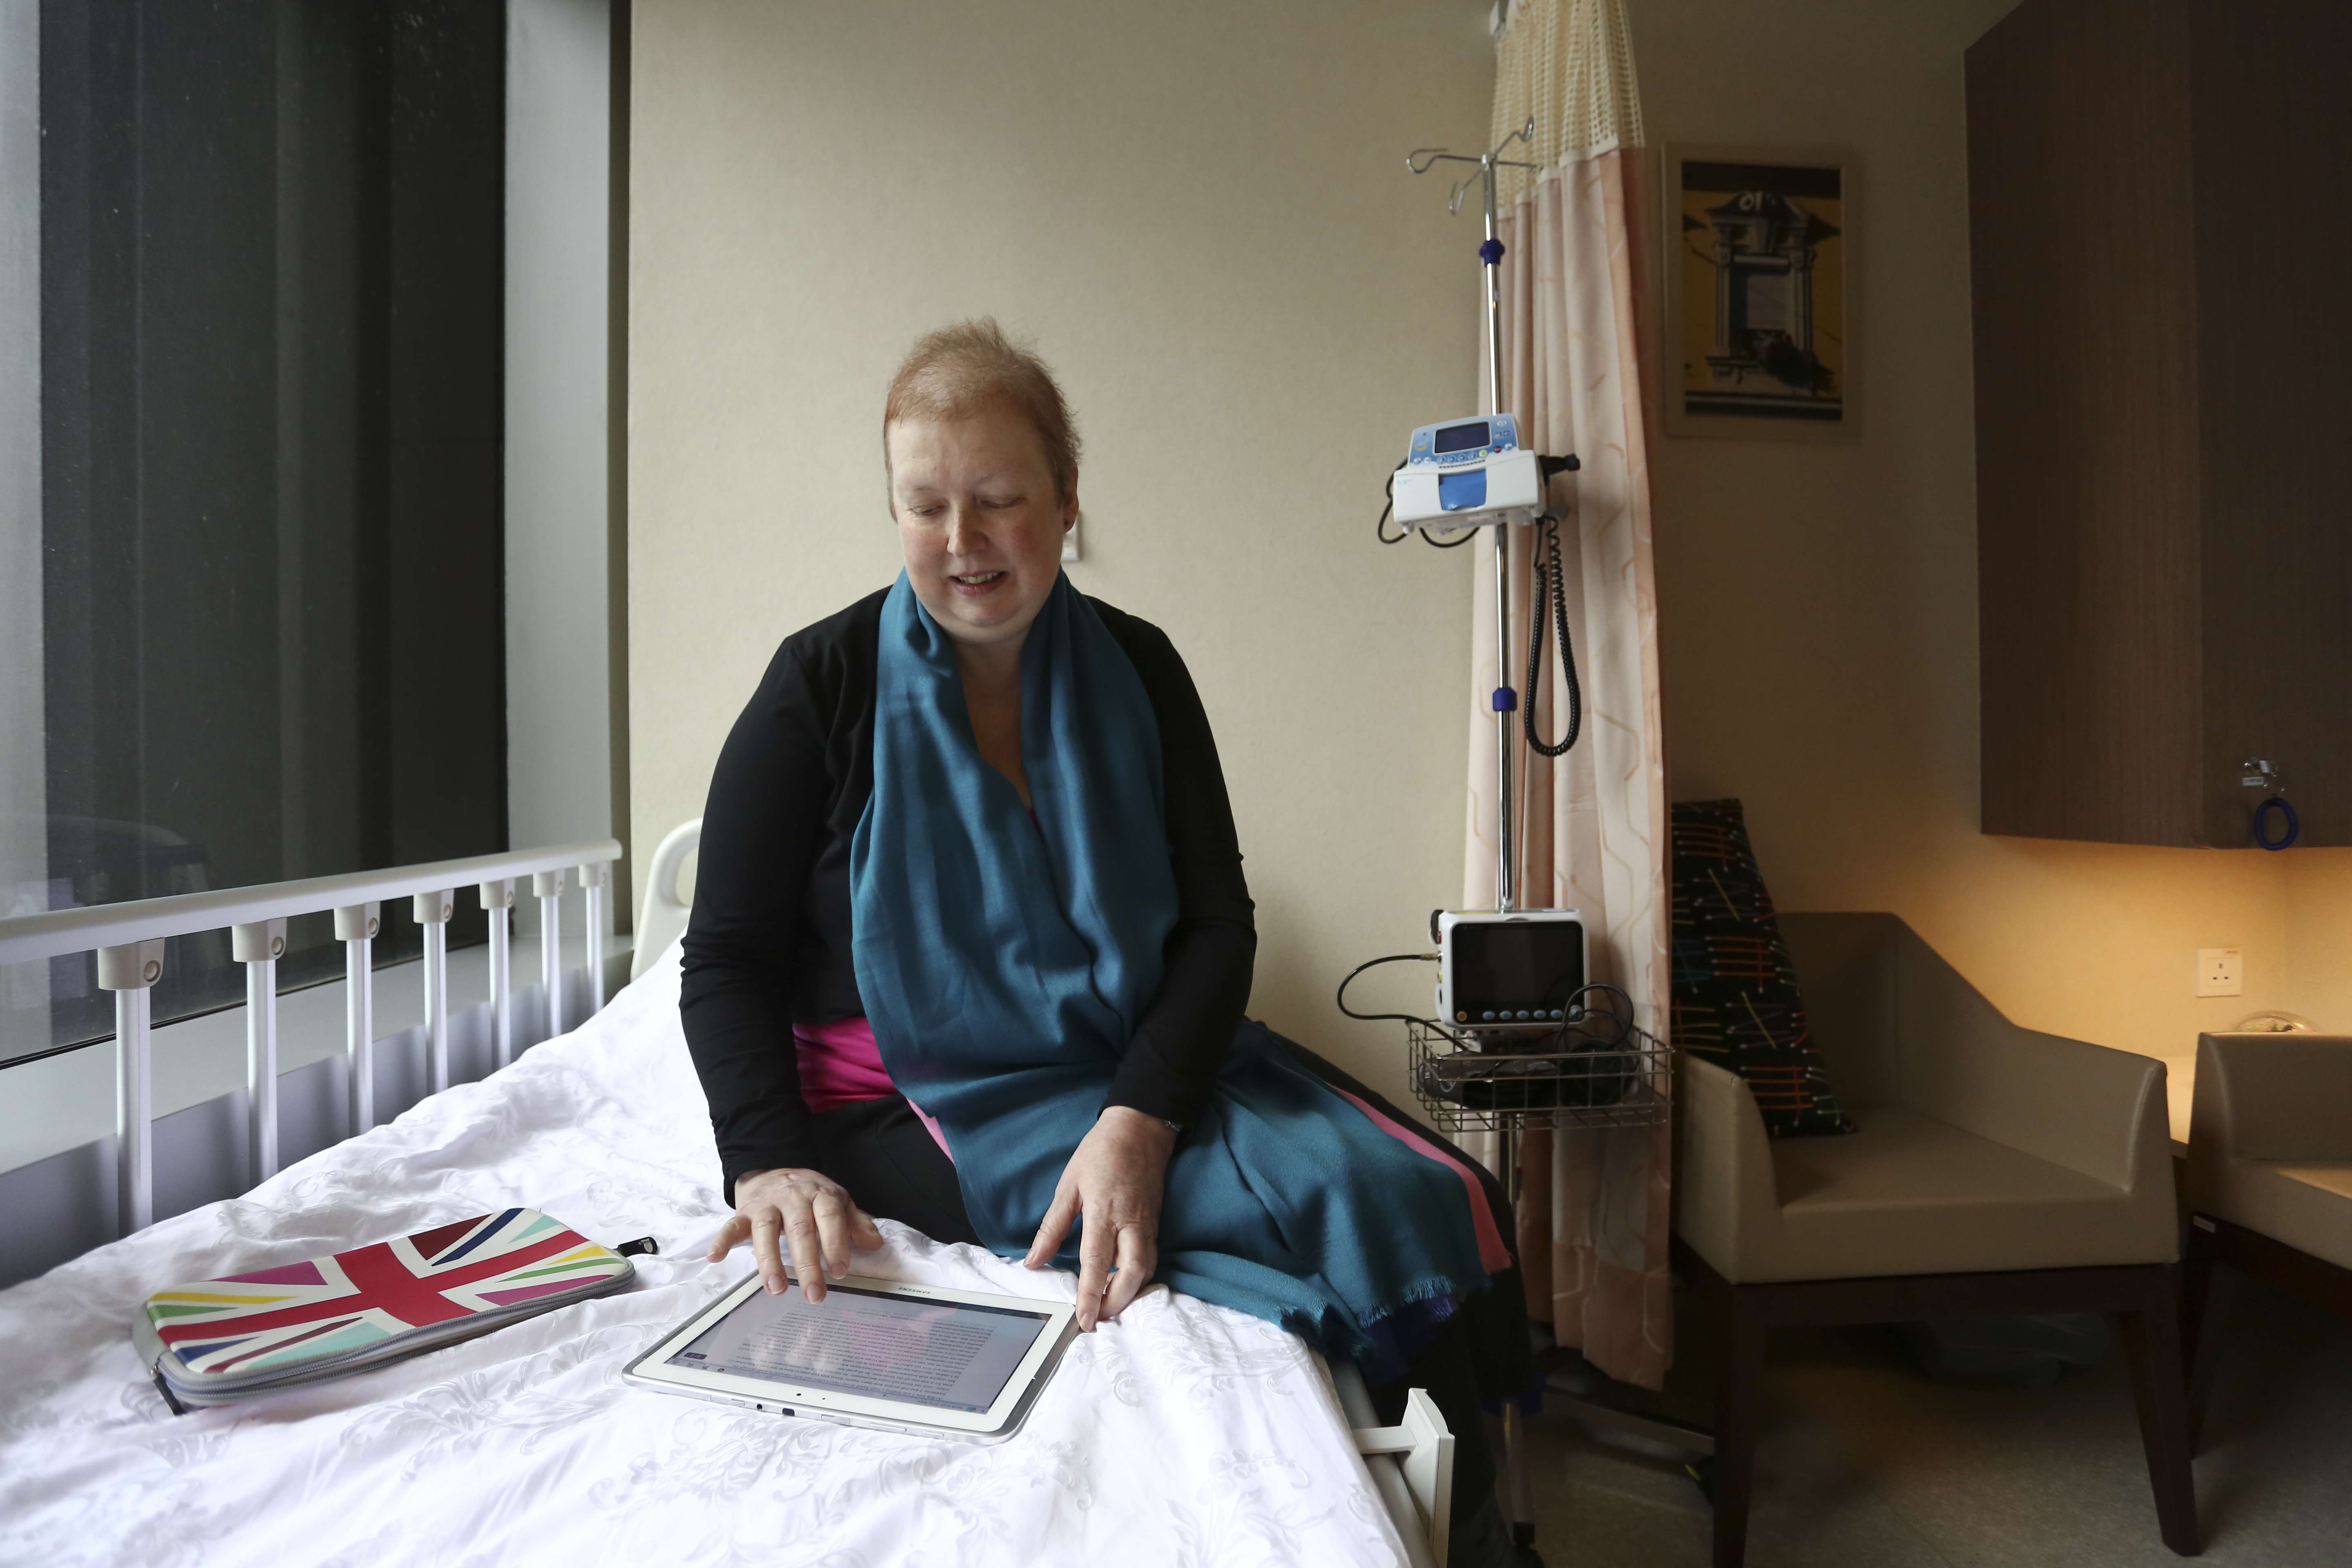 Hilary Faulkner, who is writing a book about her experience of cancer and treatment, at the Hong Kong Integrated Oncology Centre. Photo: Jonathan Wong